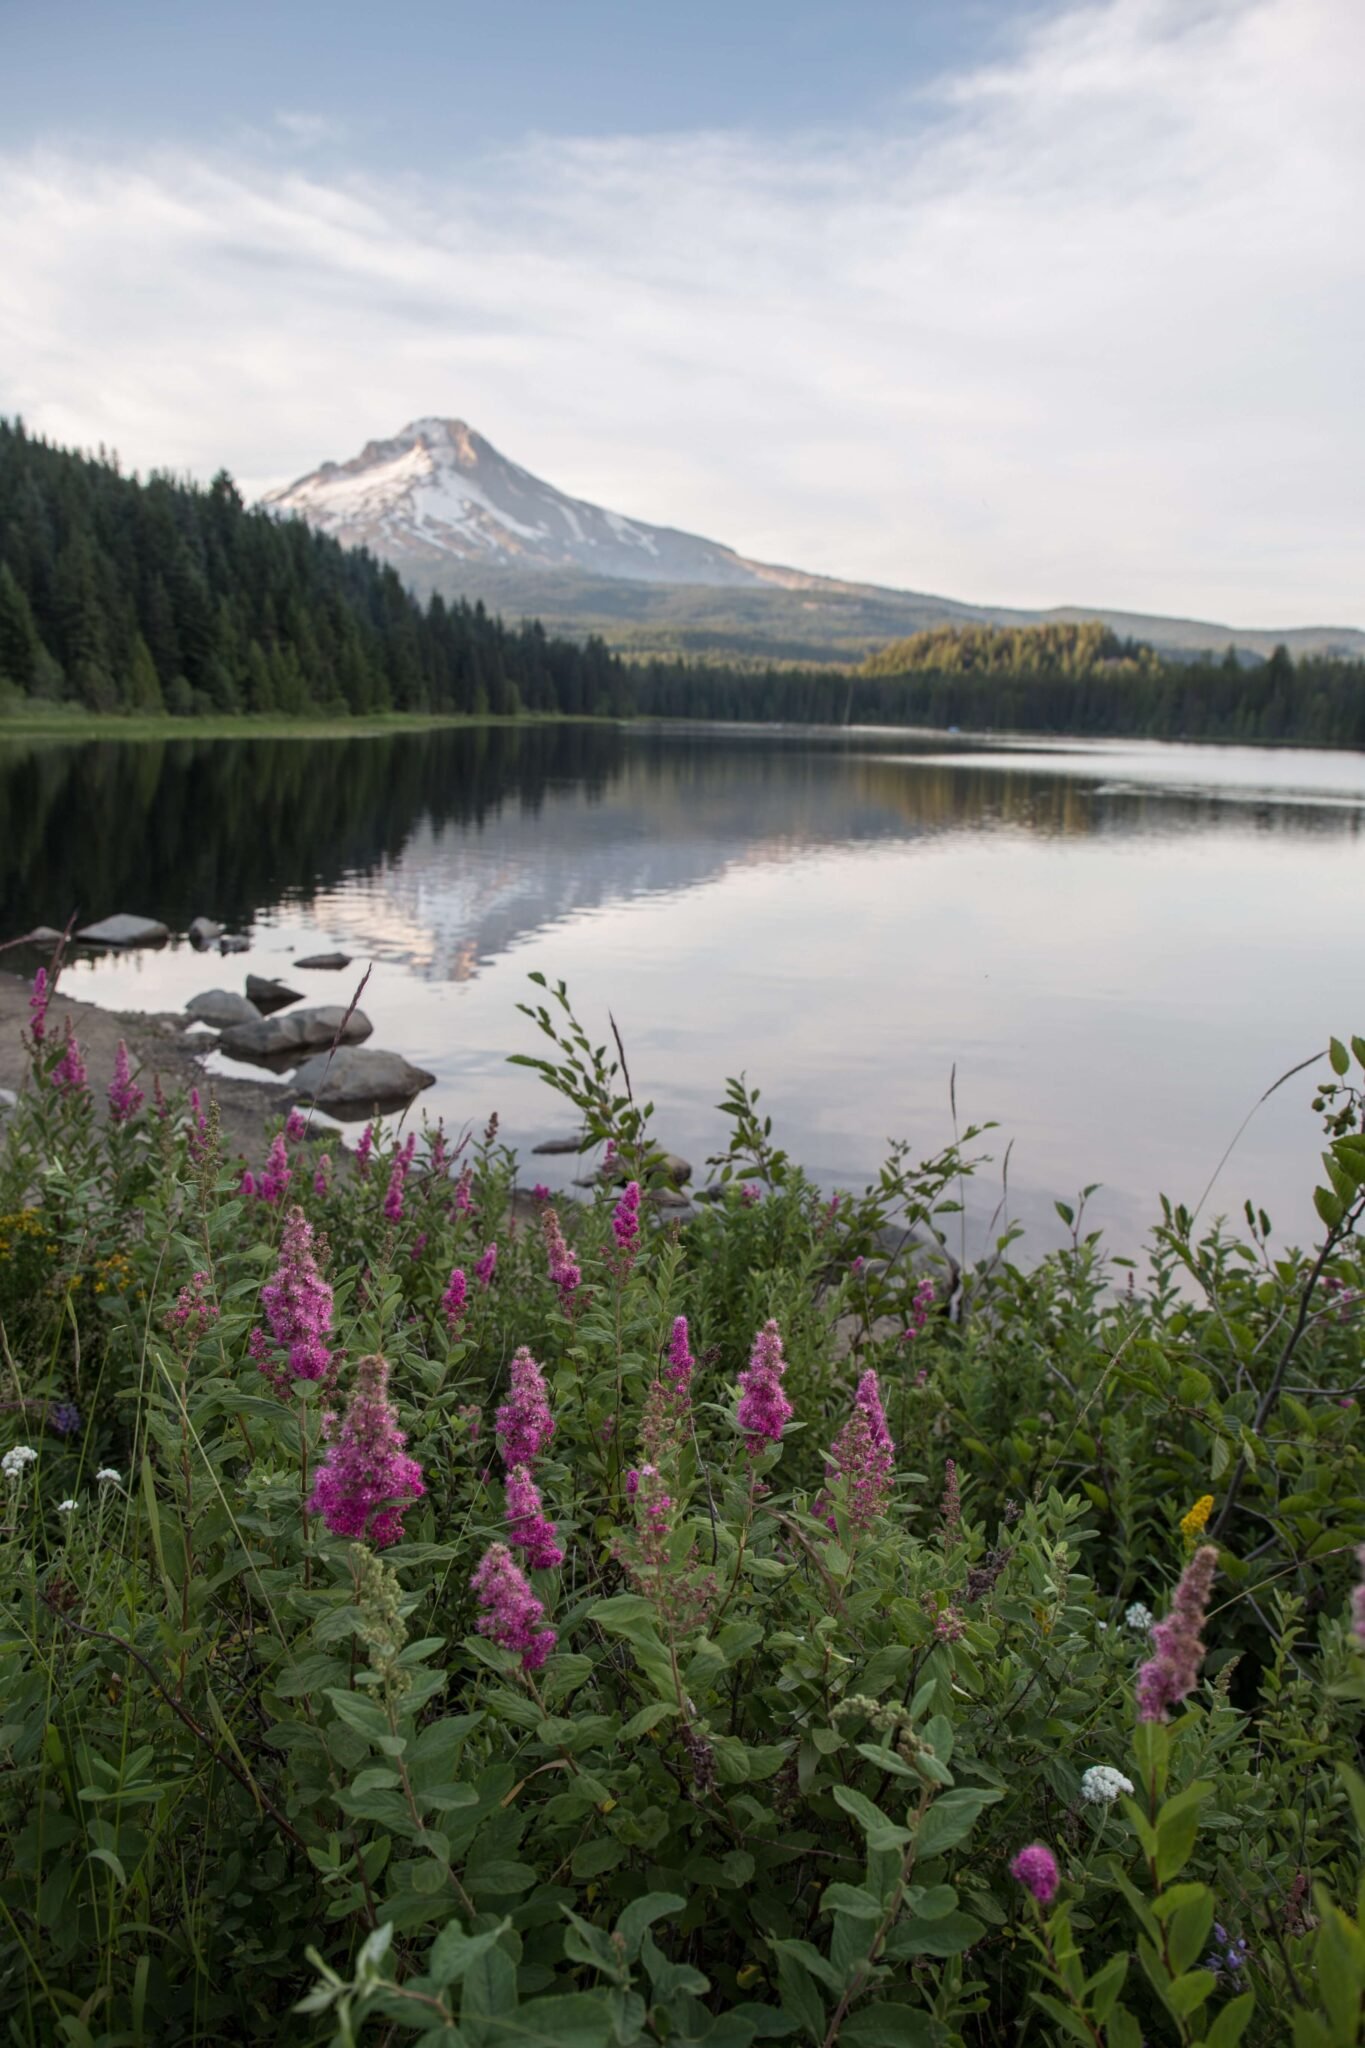 Oregon, places to travel this year